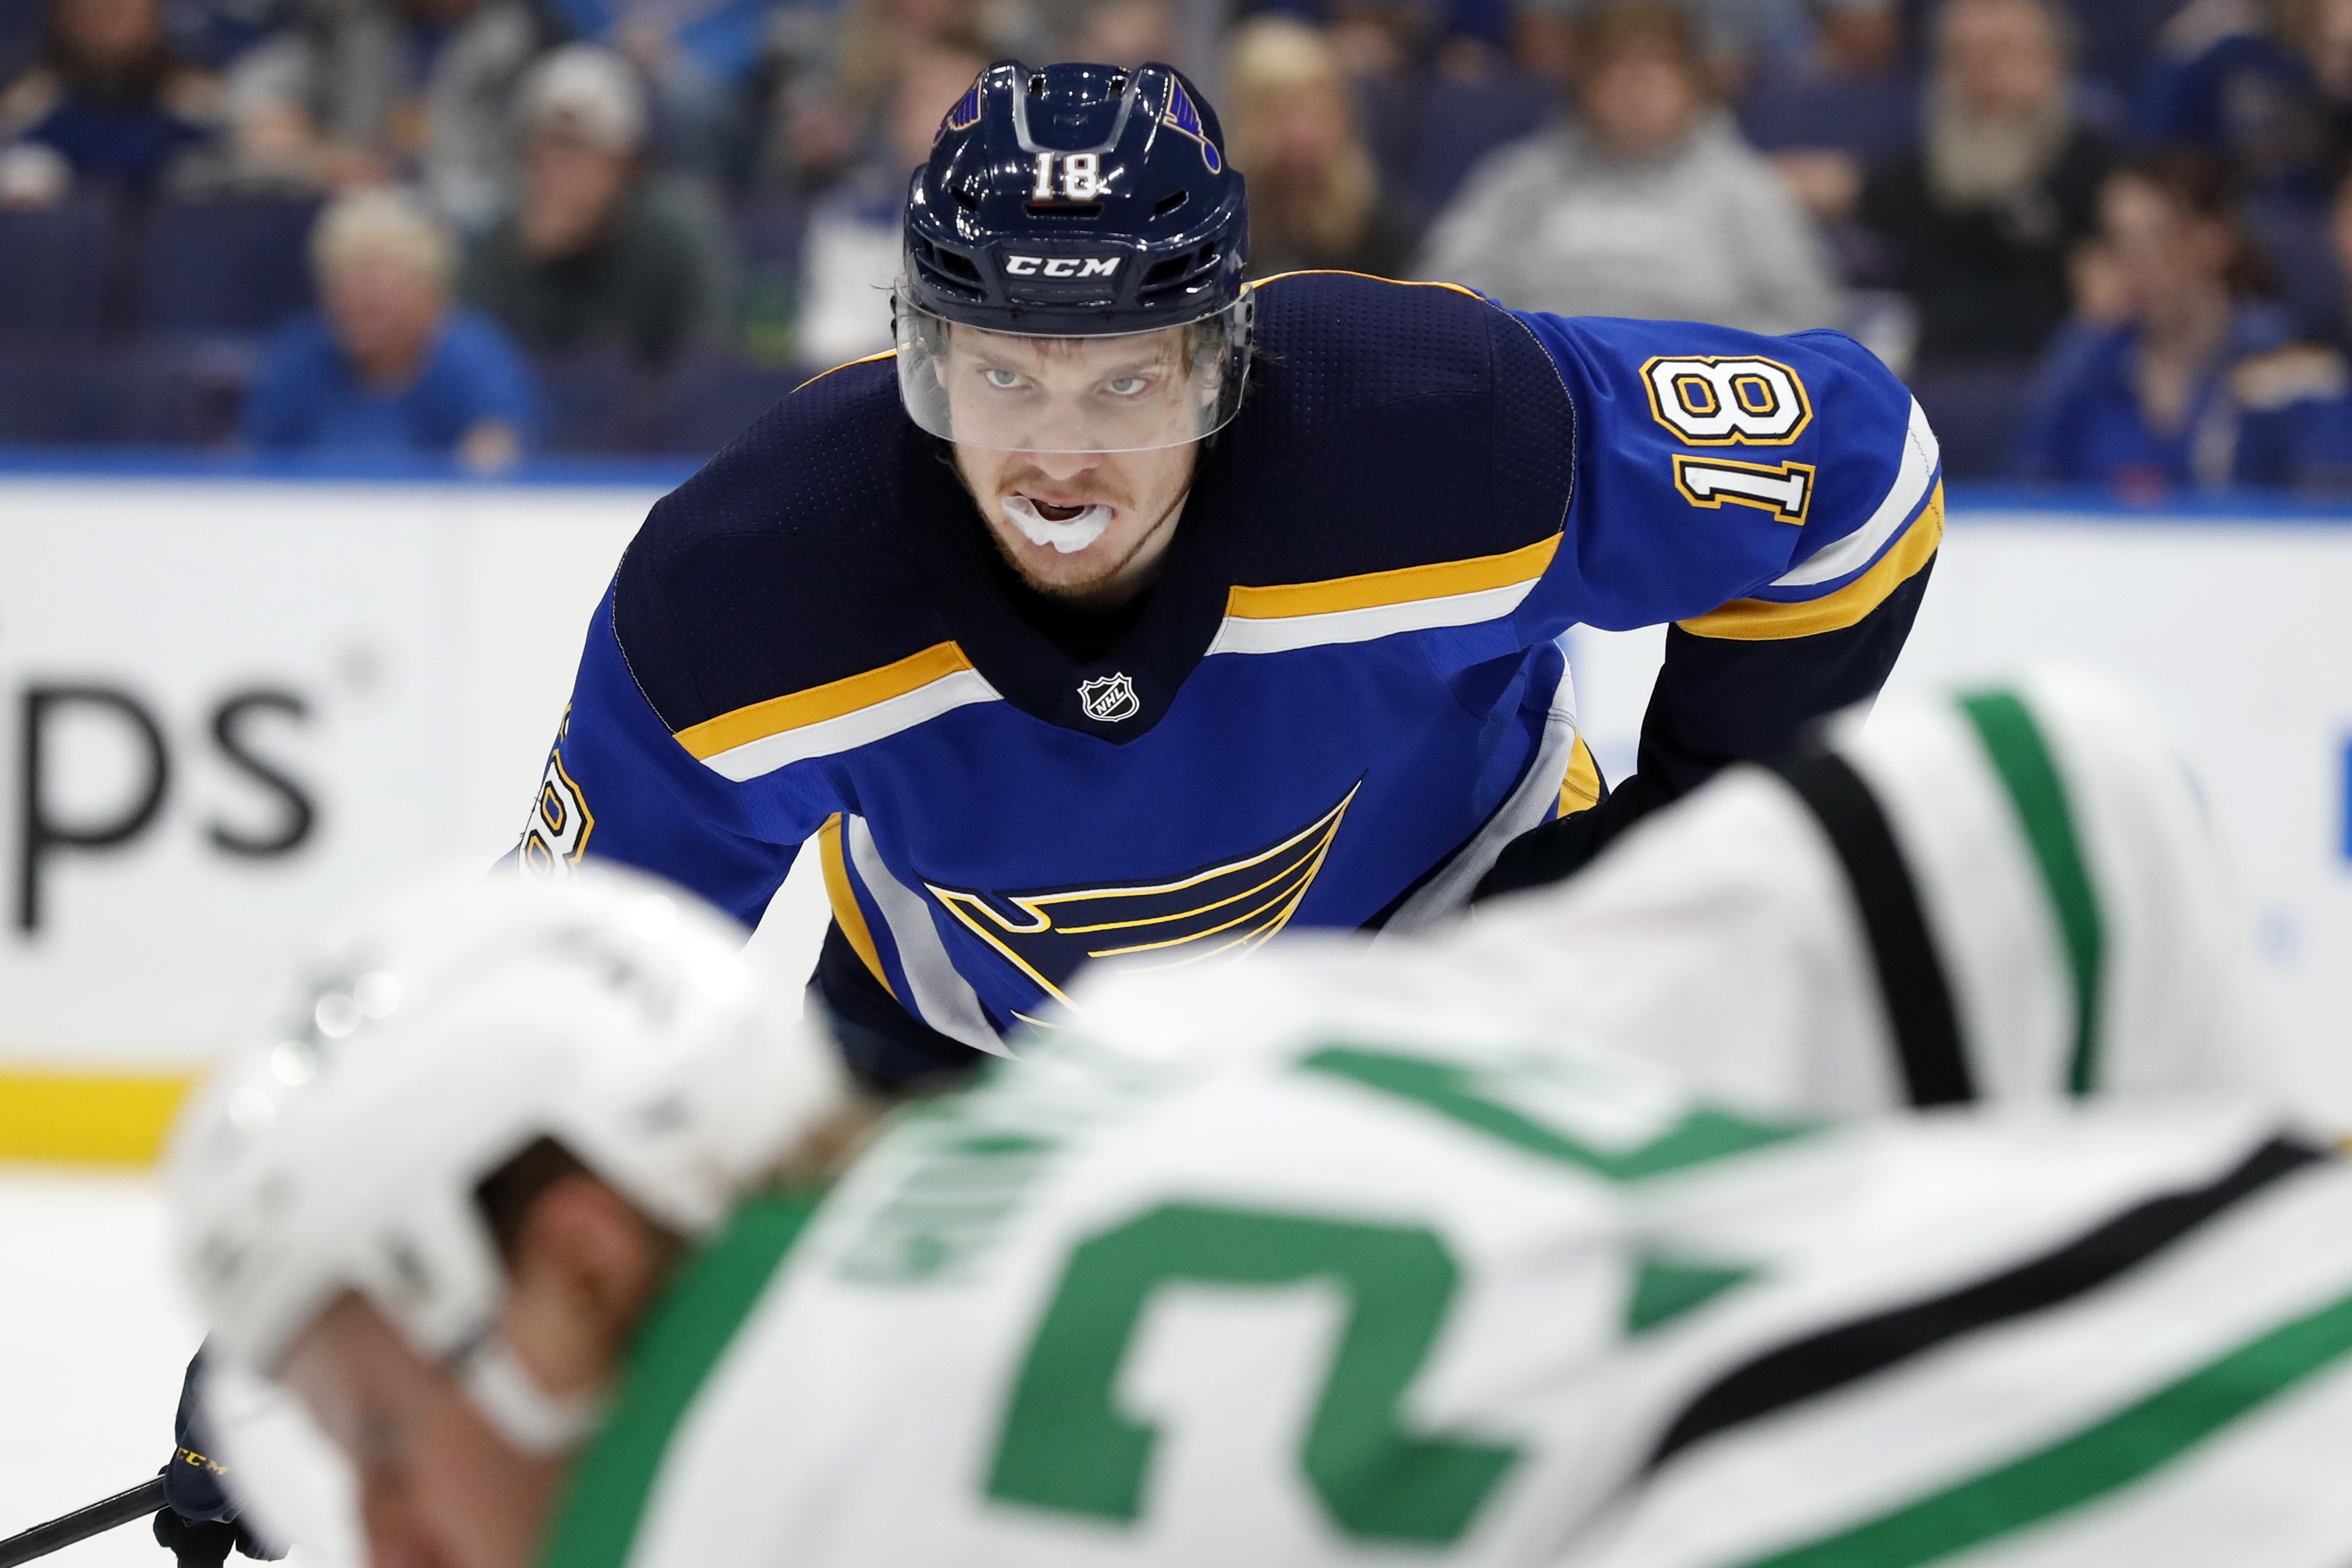 Blues rookie Robert Thomas playing above his age in playoff run | The Spokesman-Review